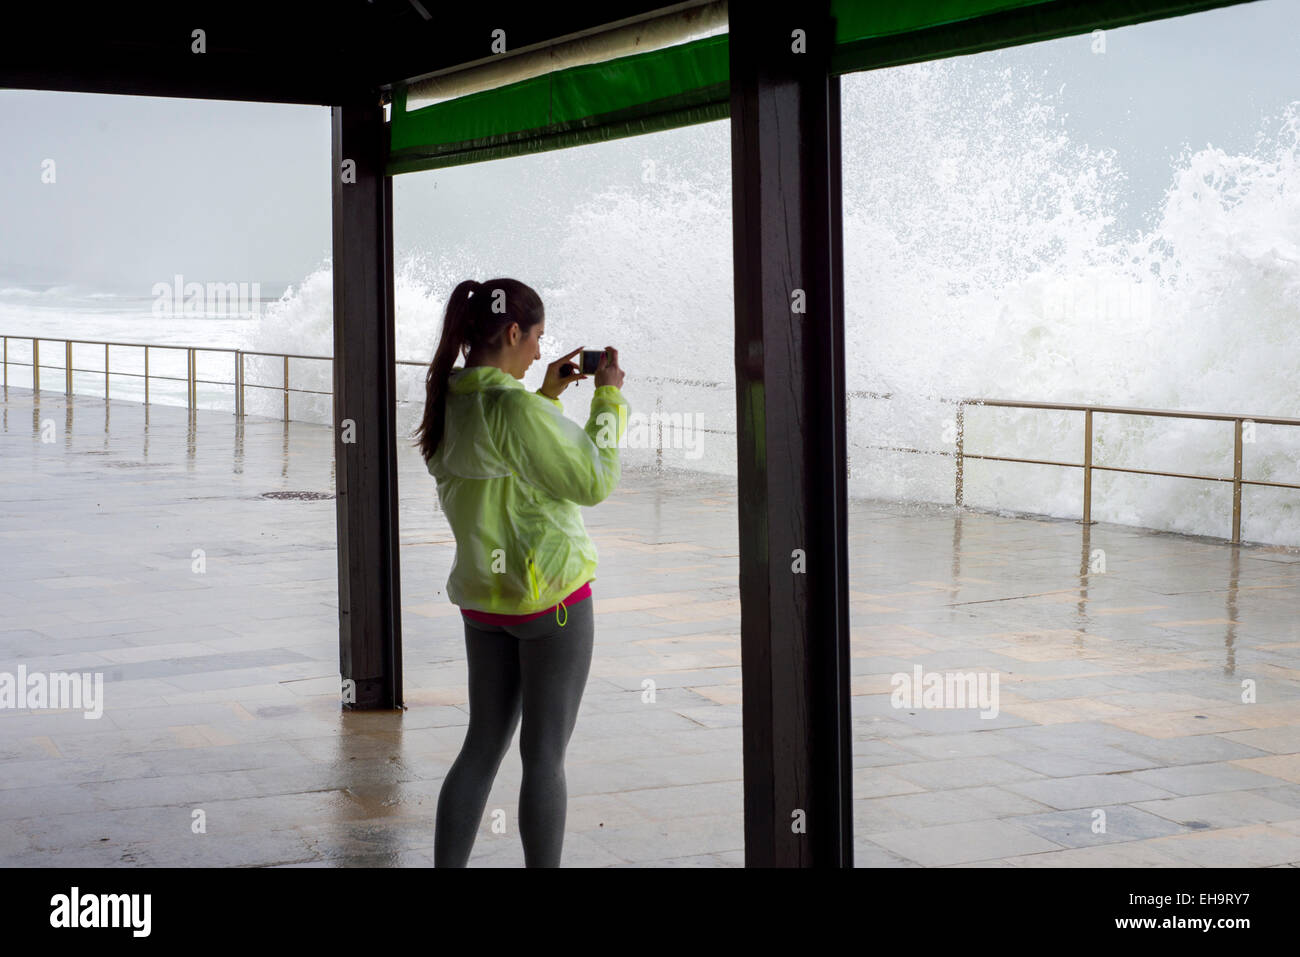 women photographing large crashing waves aginst broadwalk with mobile phone, dressed in running gear Stock Photo